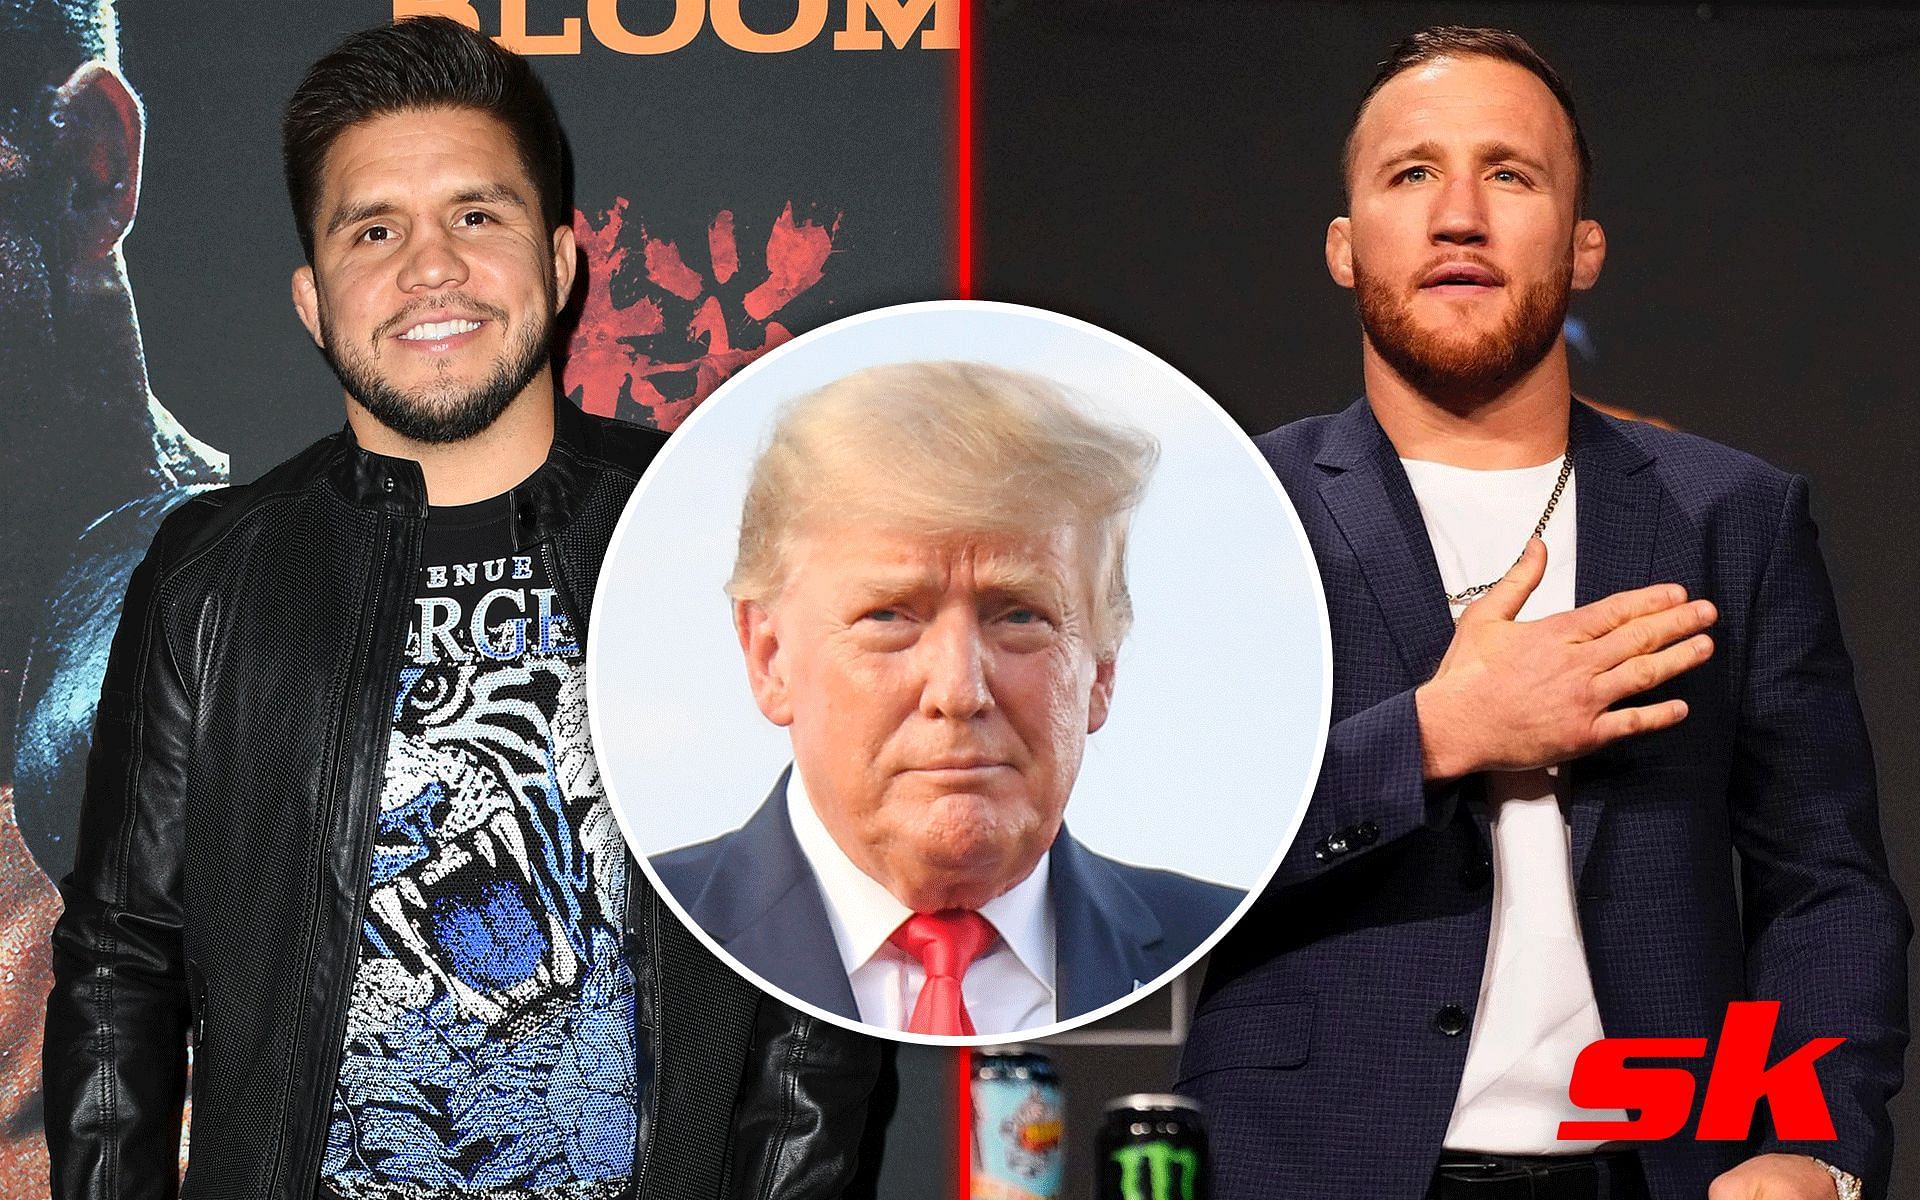 Donald Trump hailed Henry Cejudo and Justin Gaethje during the 2020 re-election campaign